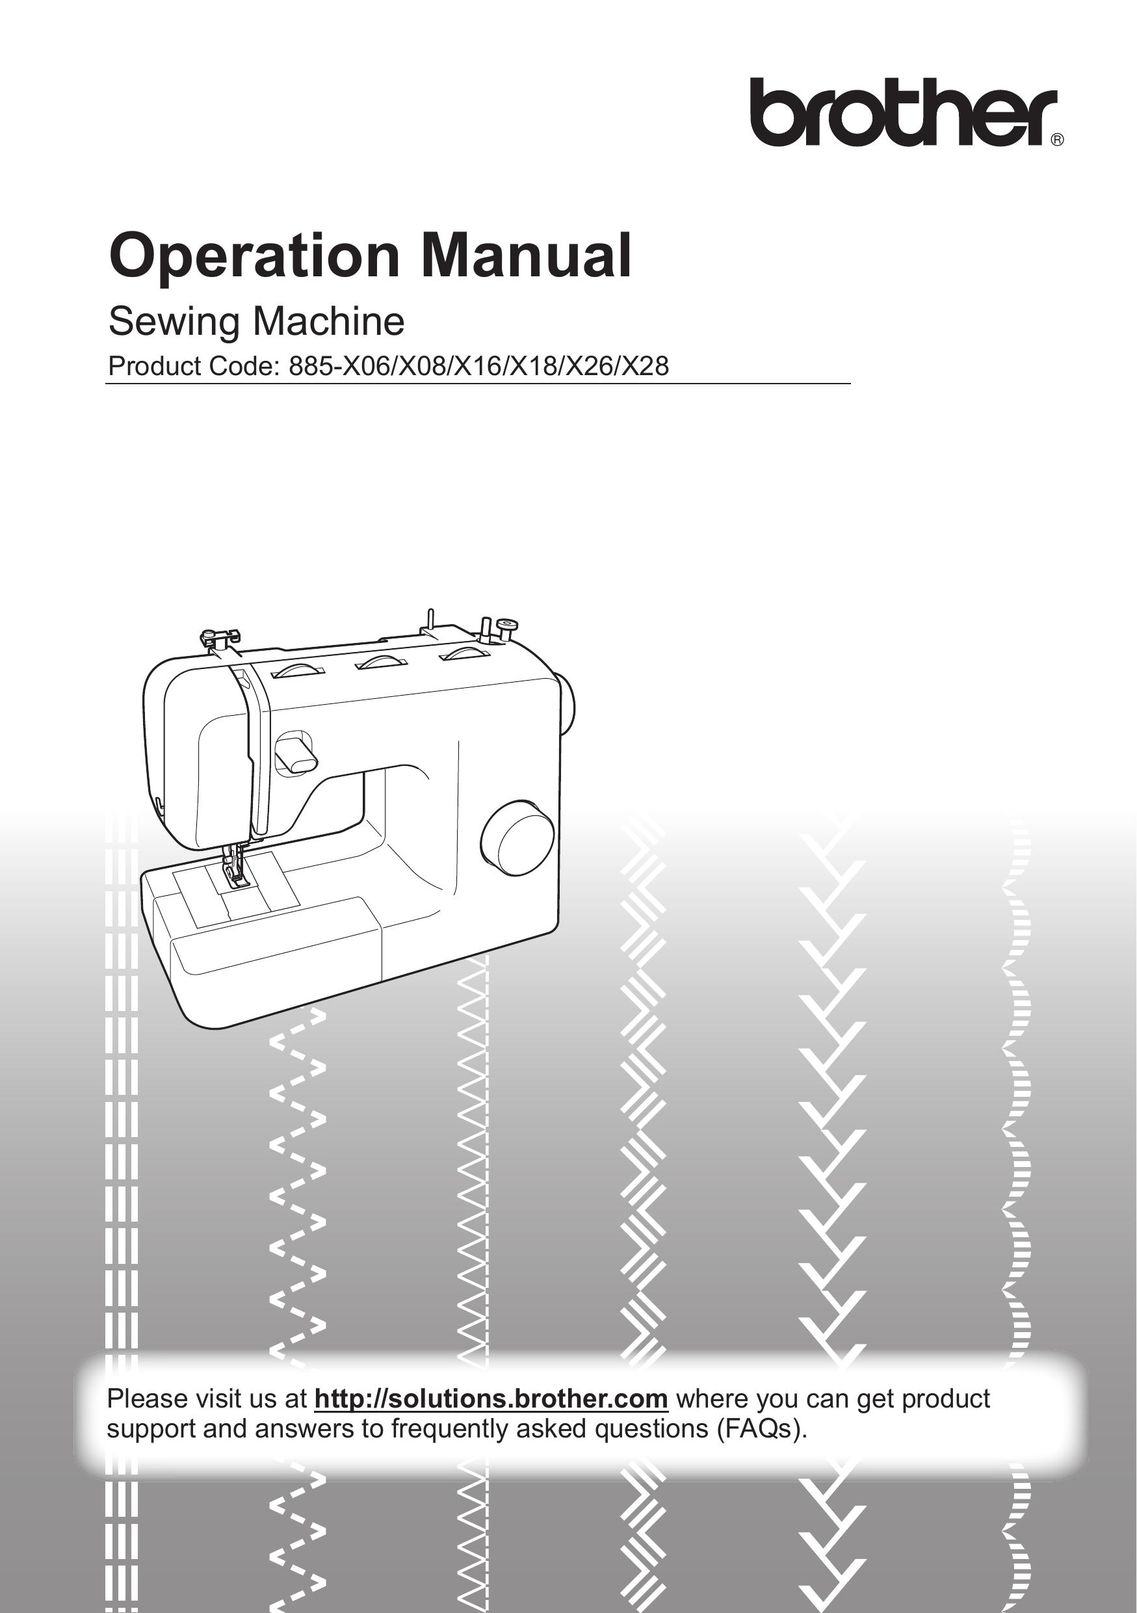 Brother 855-X06 Sewing Machine User Manual